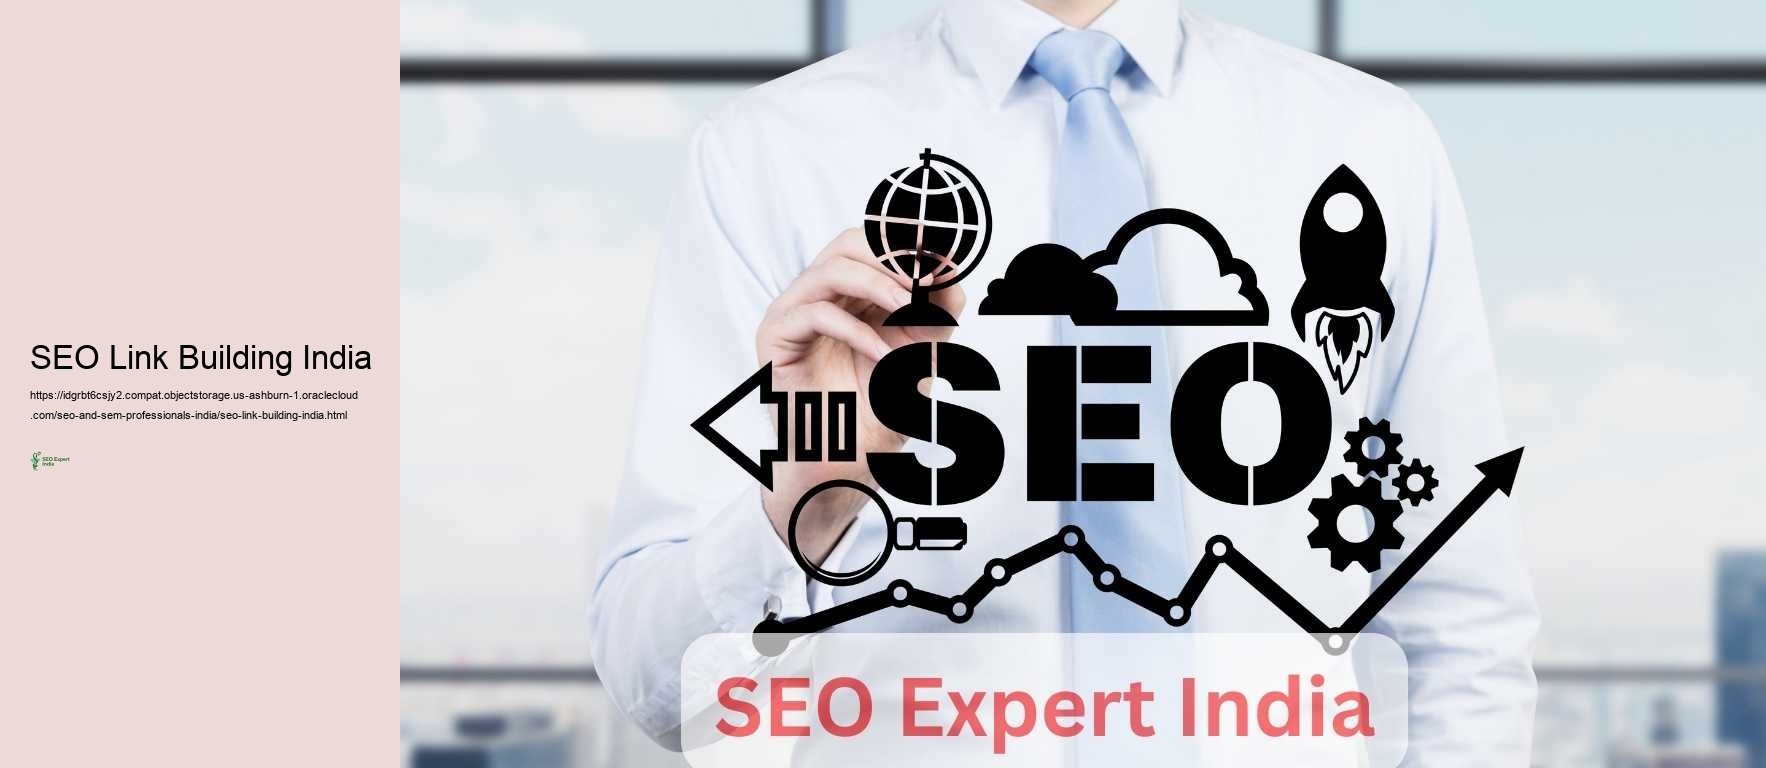 SEO Link Building India